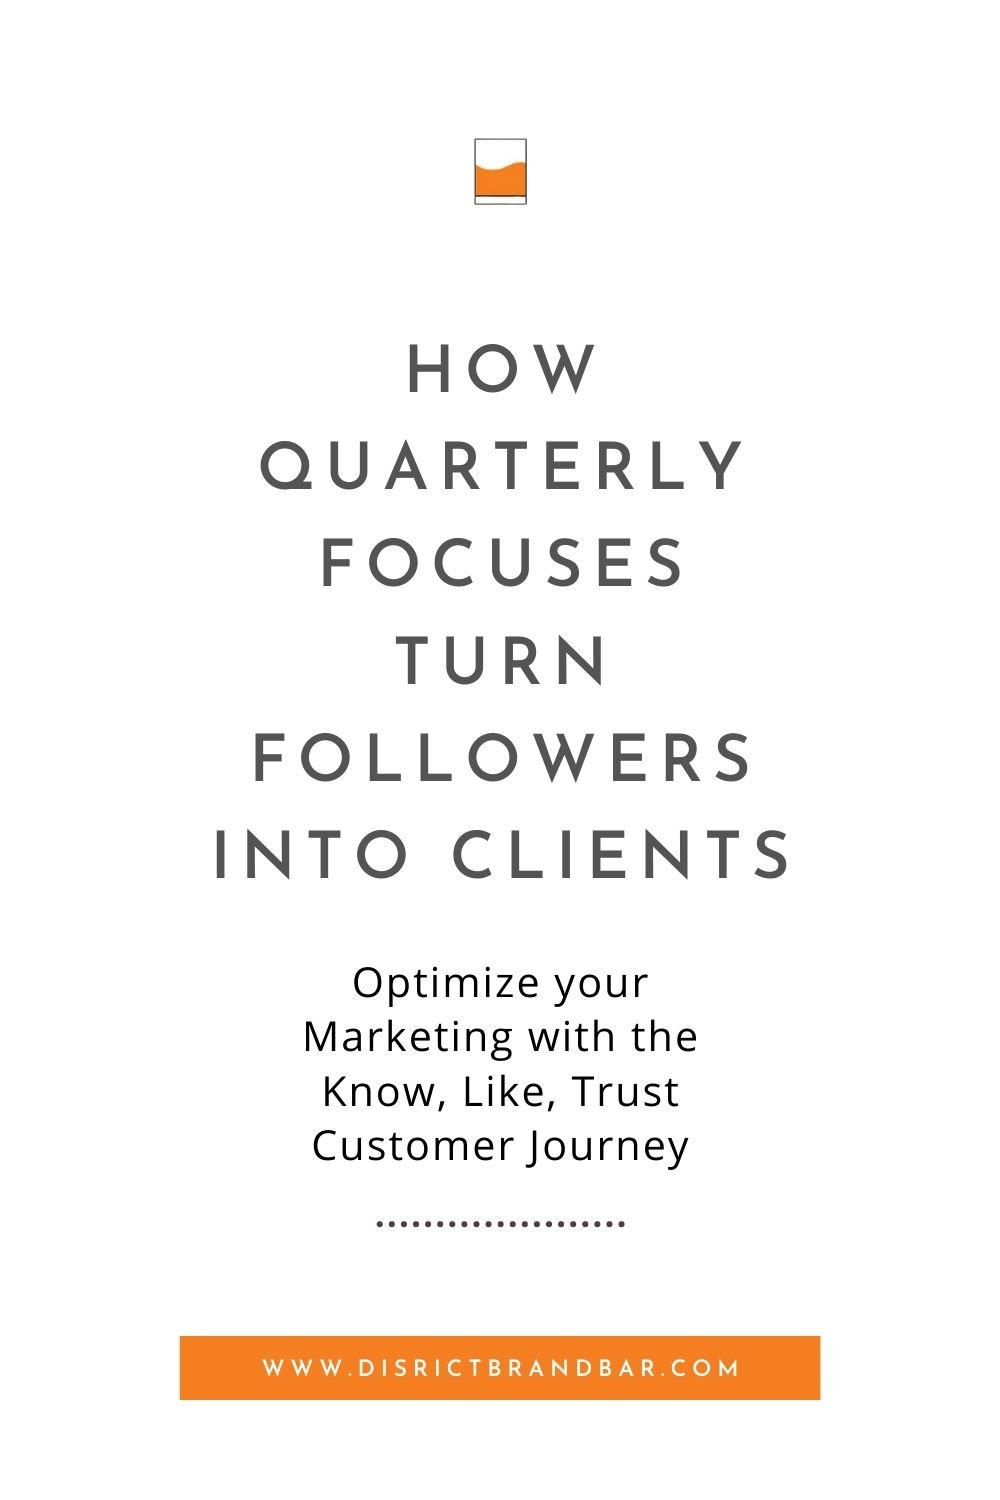 How Quarterly Focuses Turns Followers into Clients